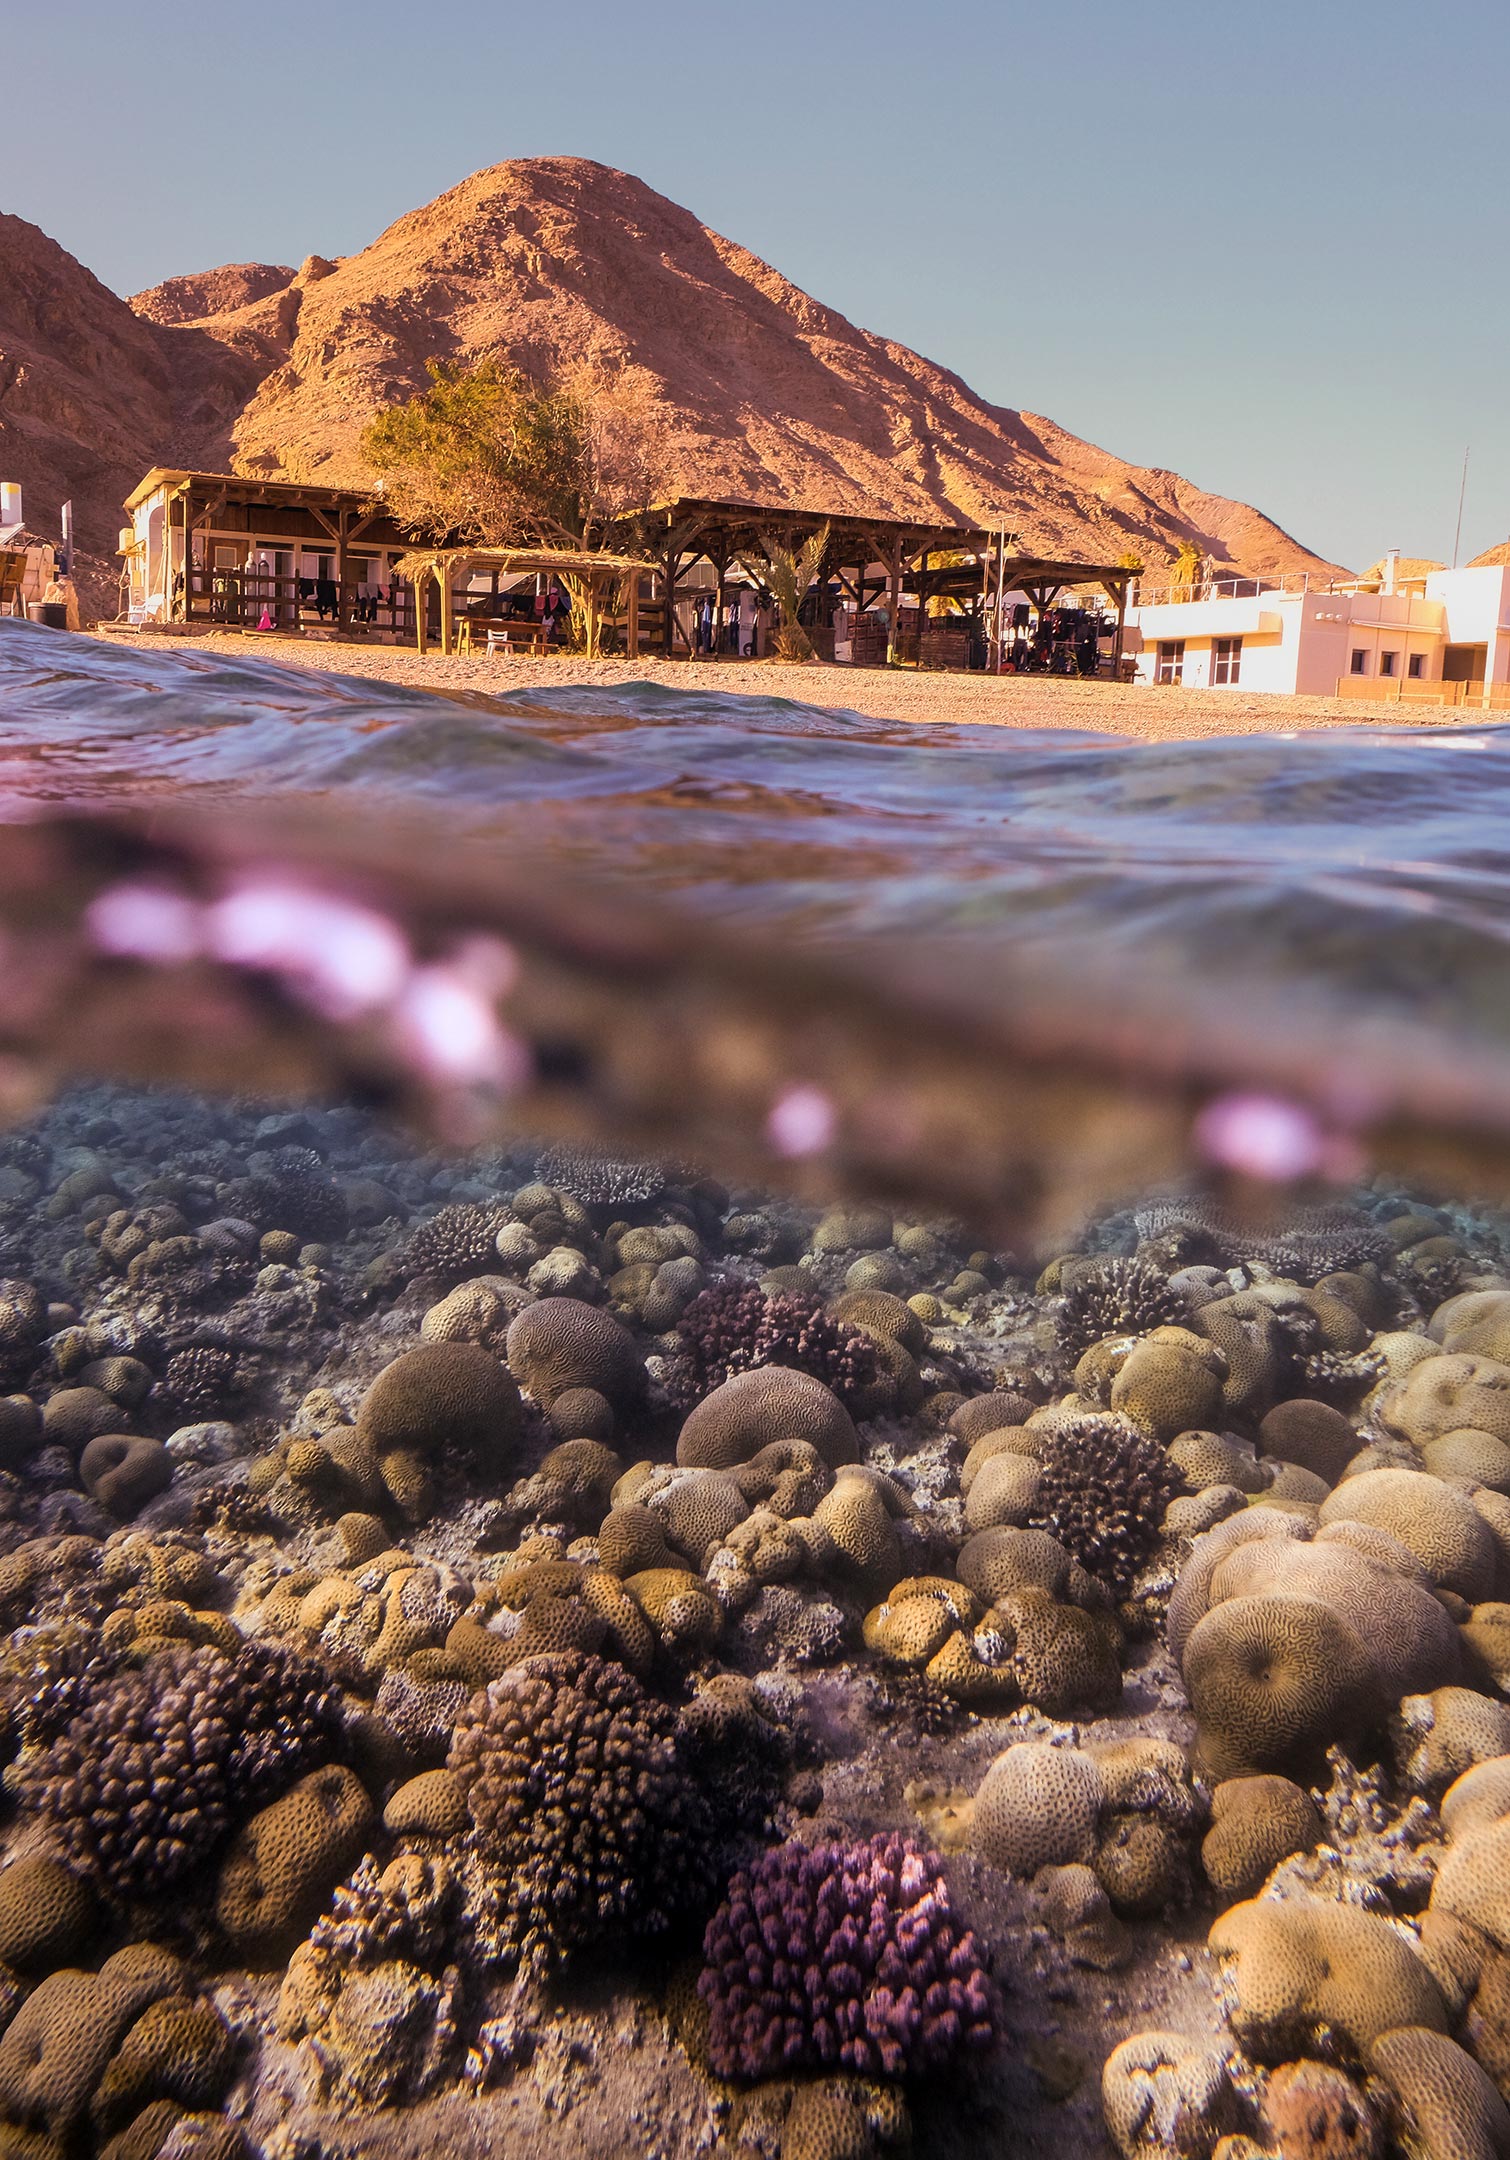 Climate Change Resilience: Northern Red Sea Corals Pass Heat Stress Test With Flying Colors